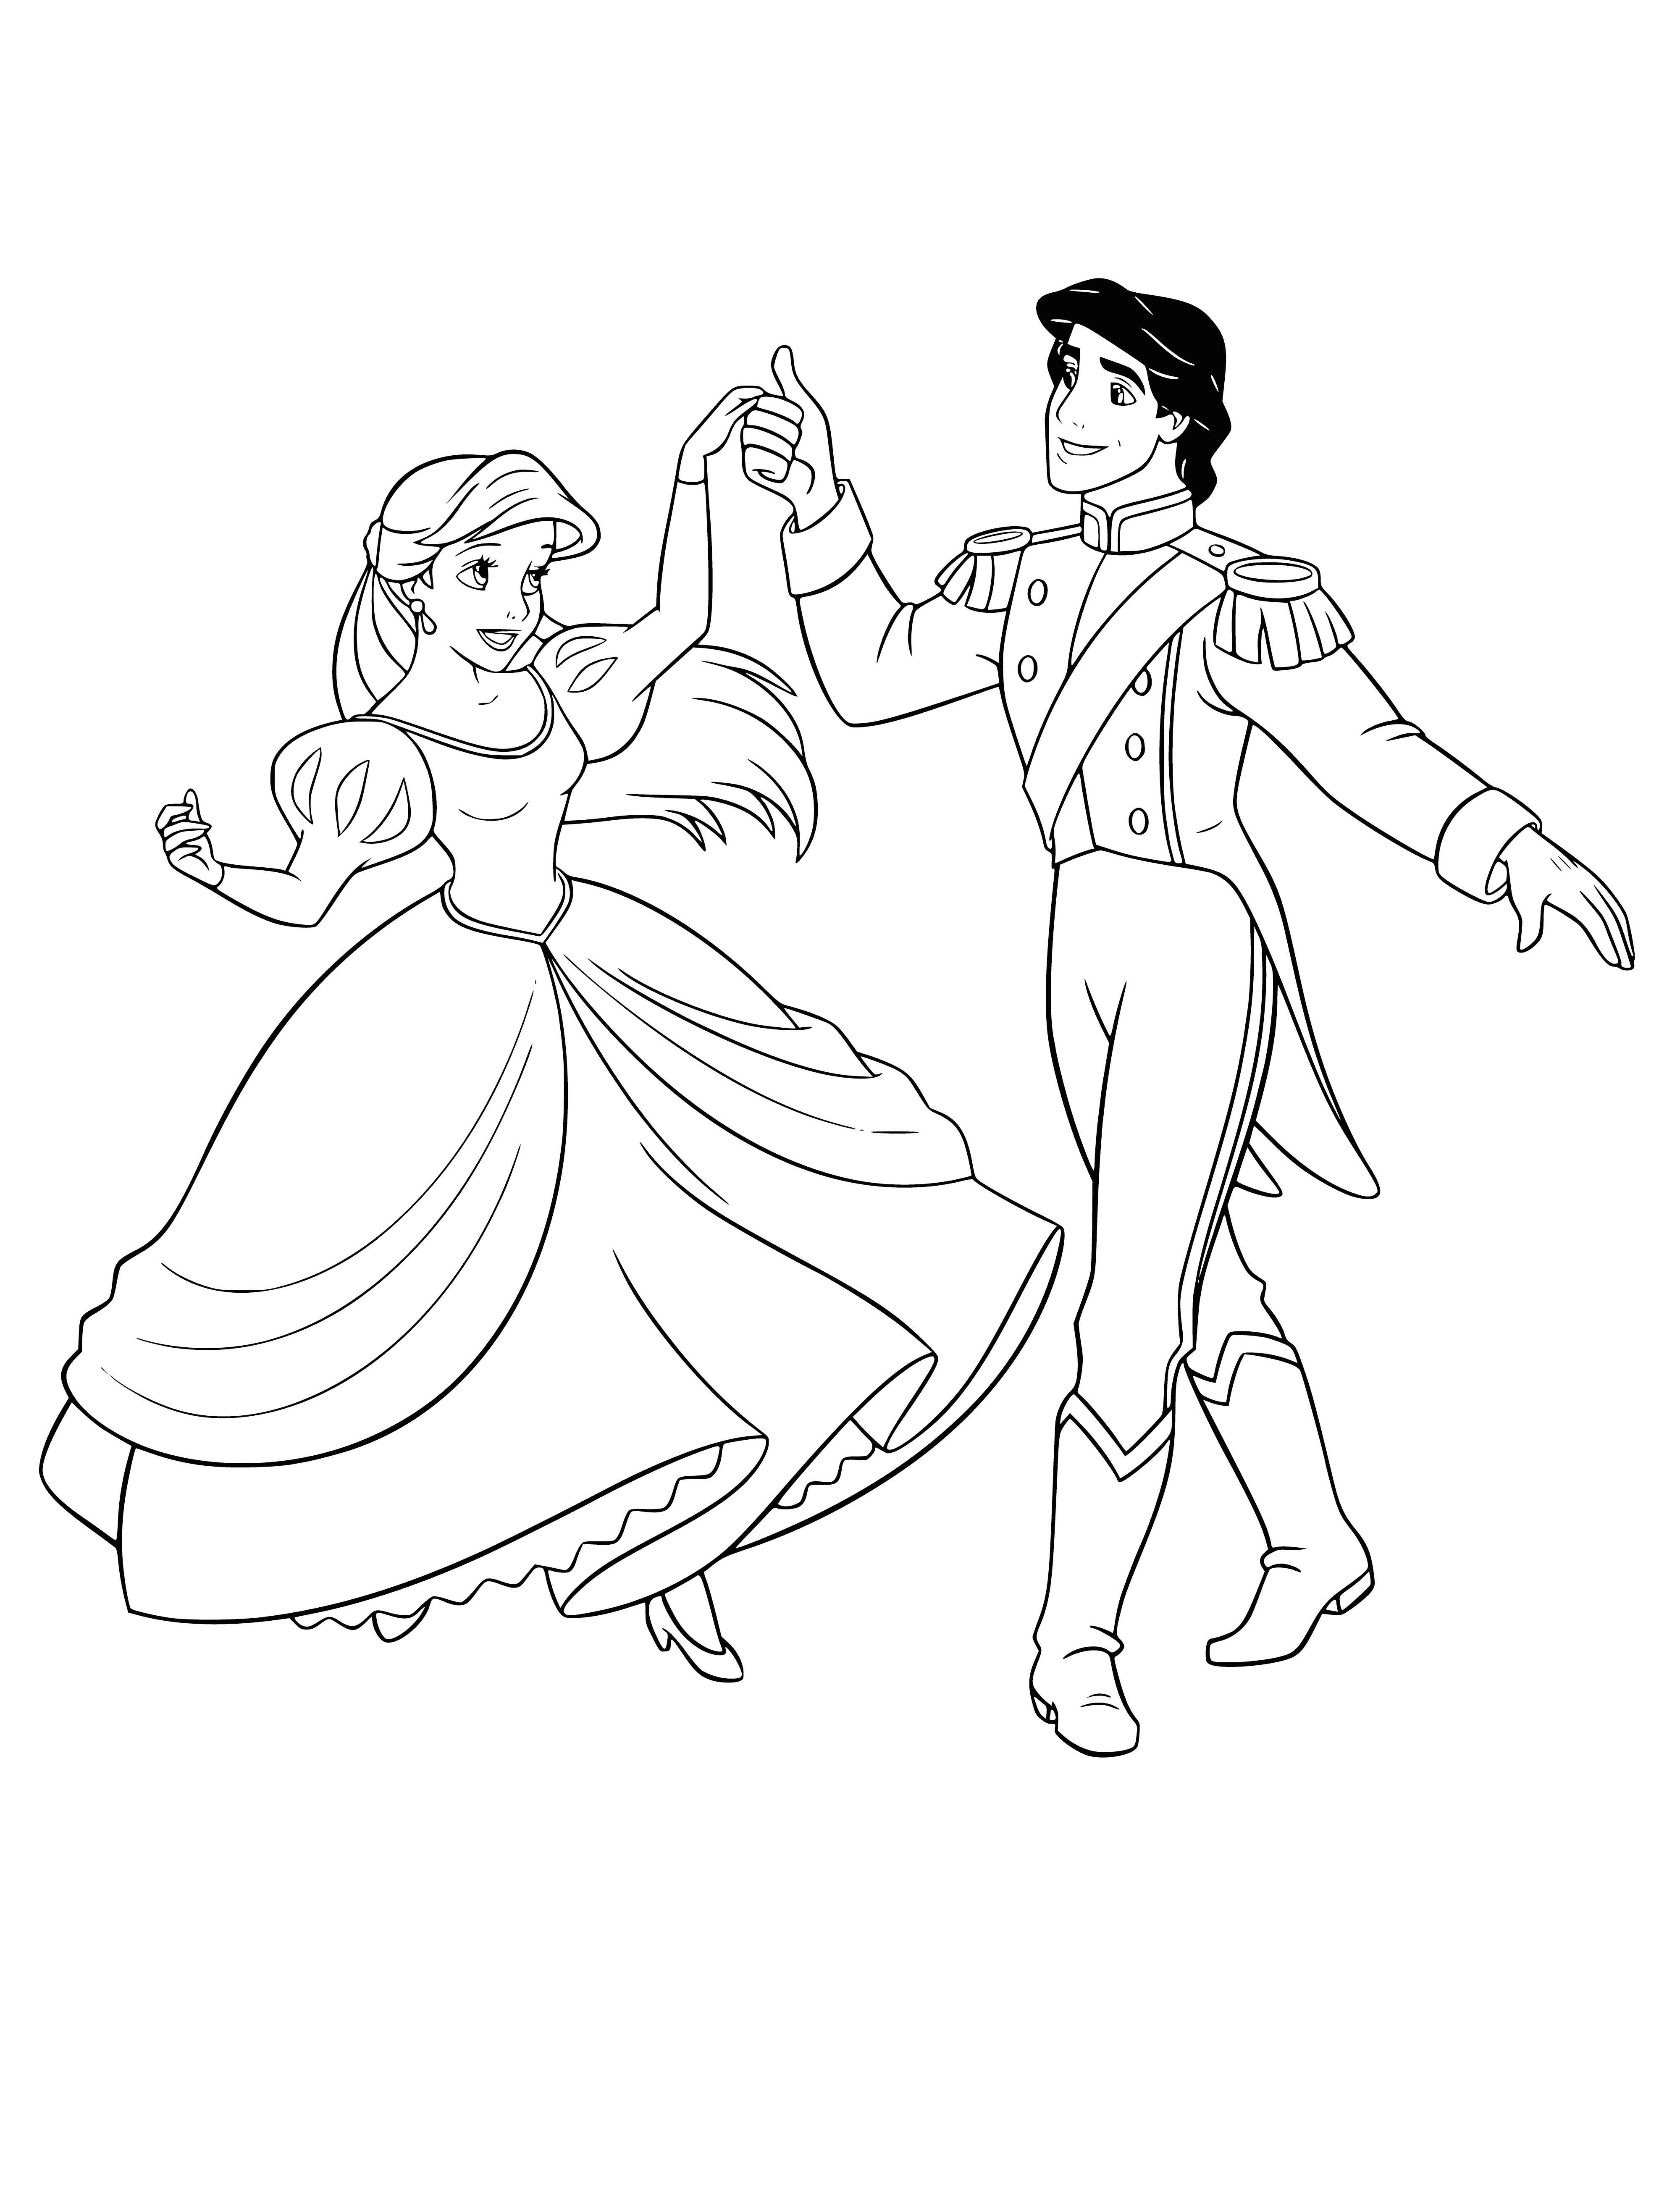 coloring page: Prince & Ariel dance in ballroom, joyfully clad in fancy dress. They smile & laugh, enjoying each other's company.